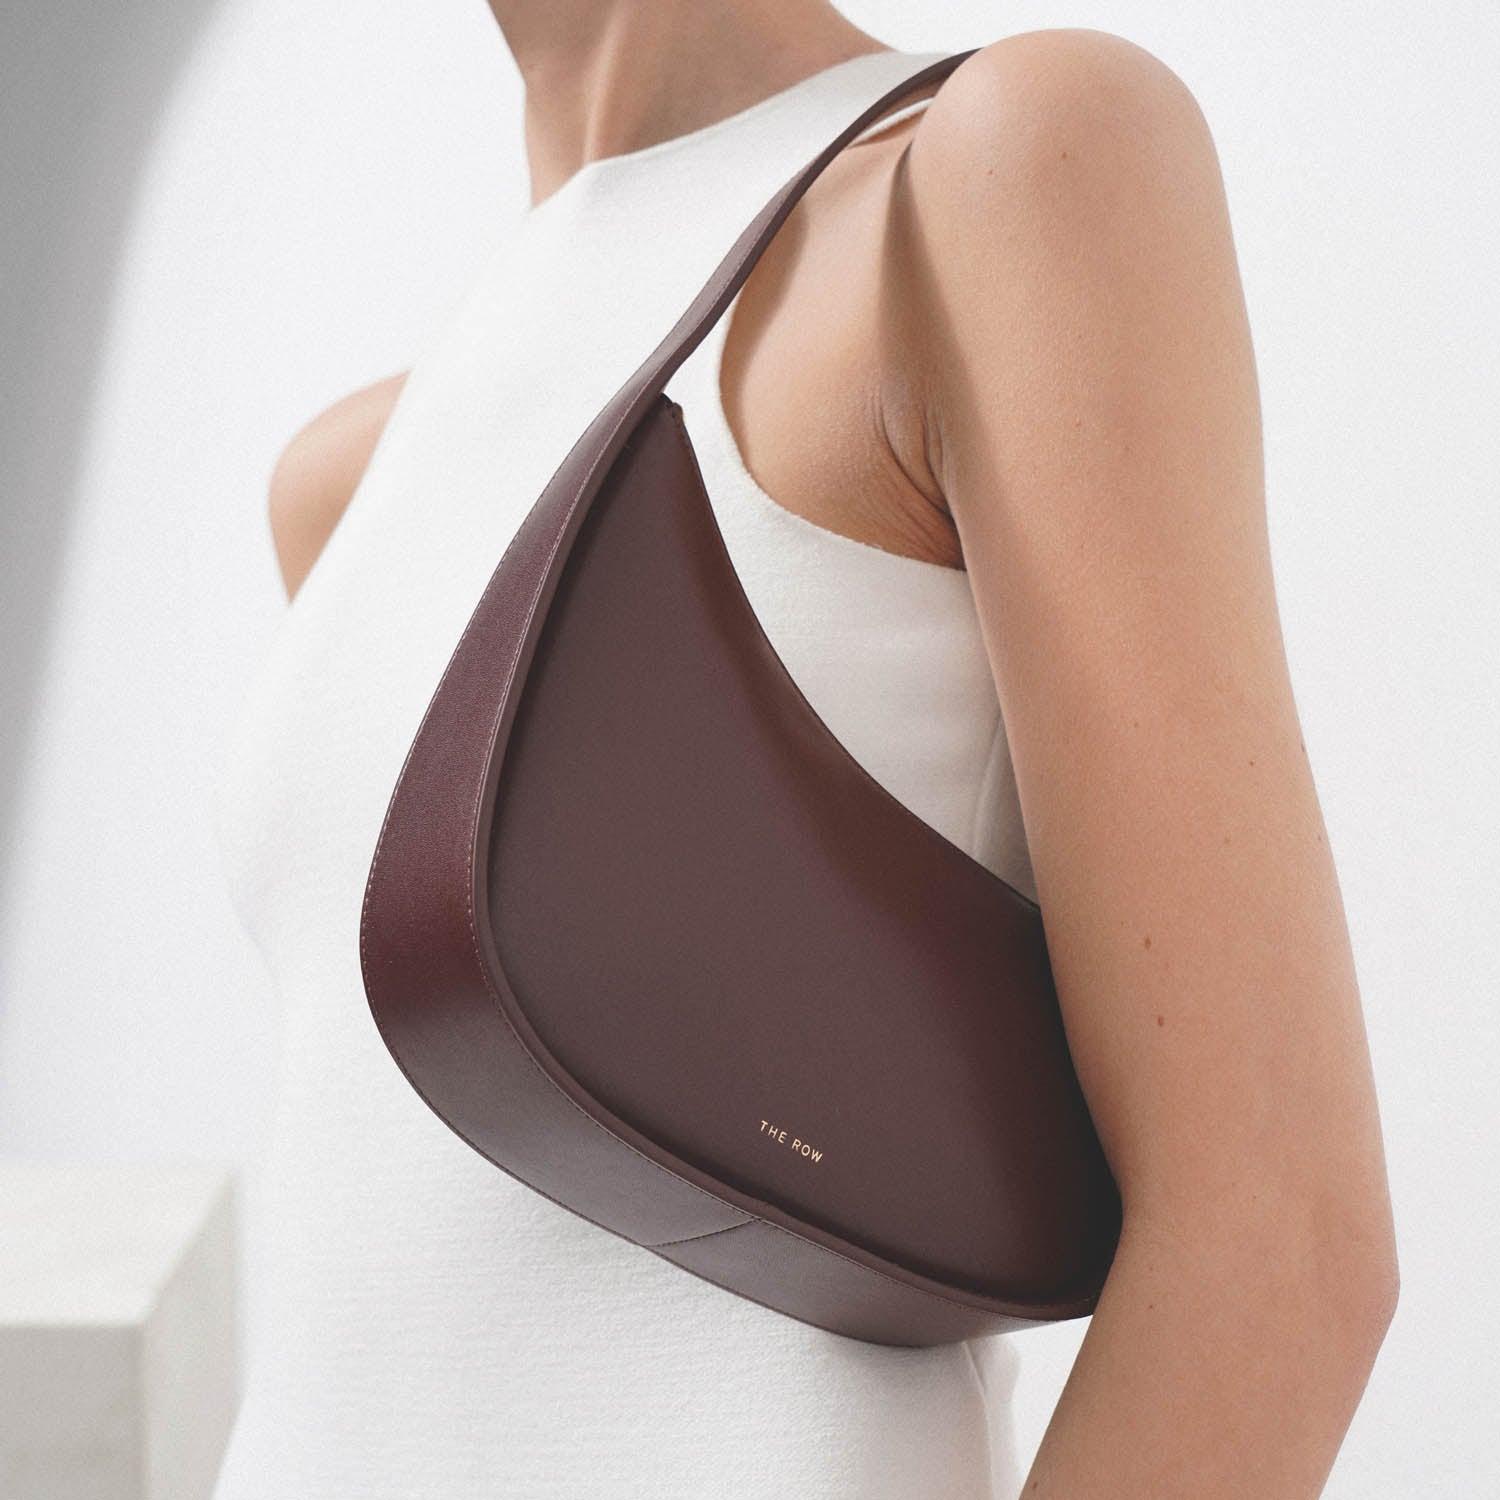 Half Moon Leather Shoulder Bag in Brown - The Row